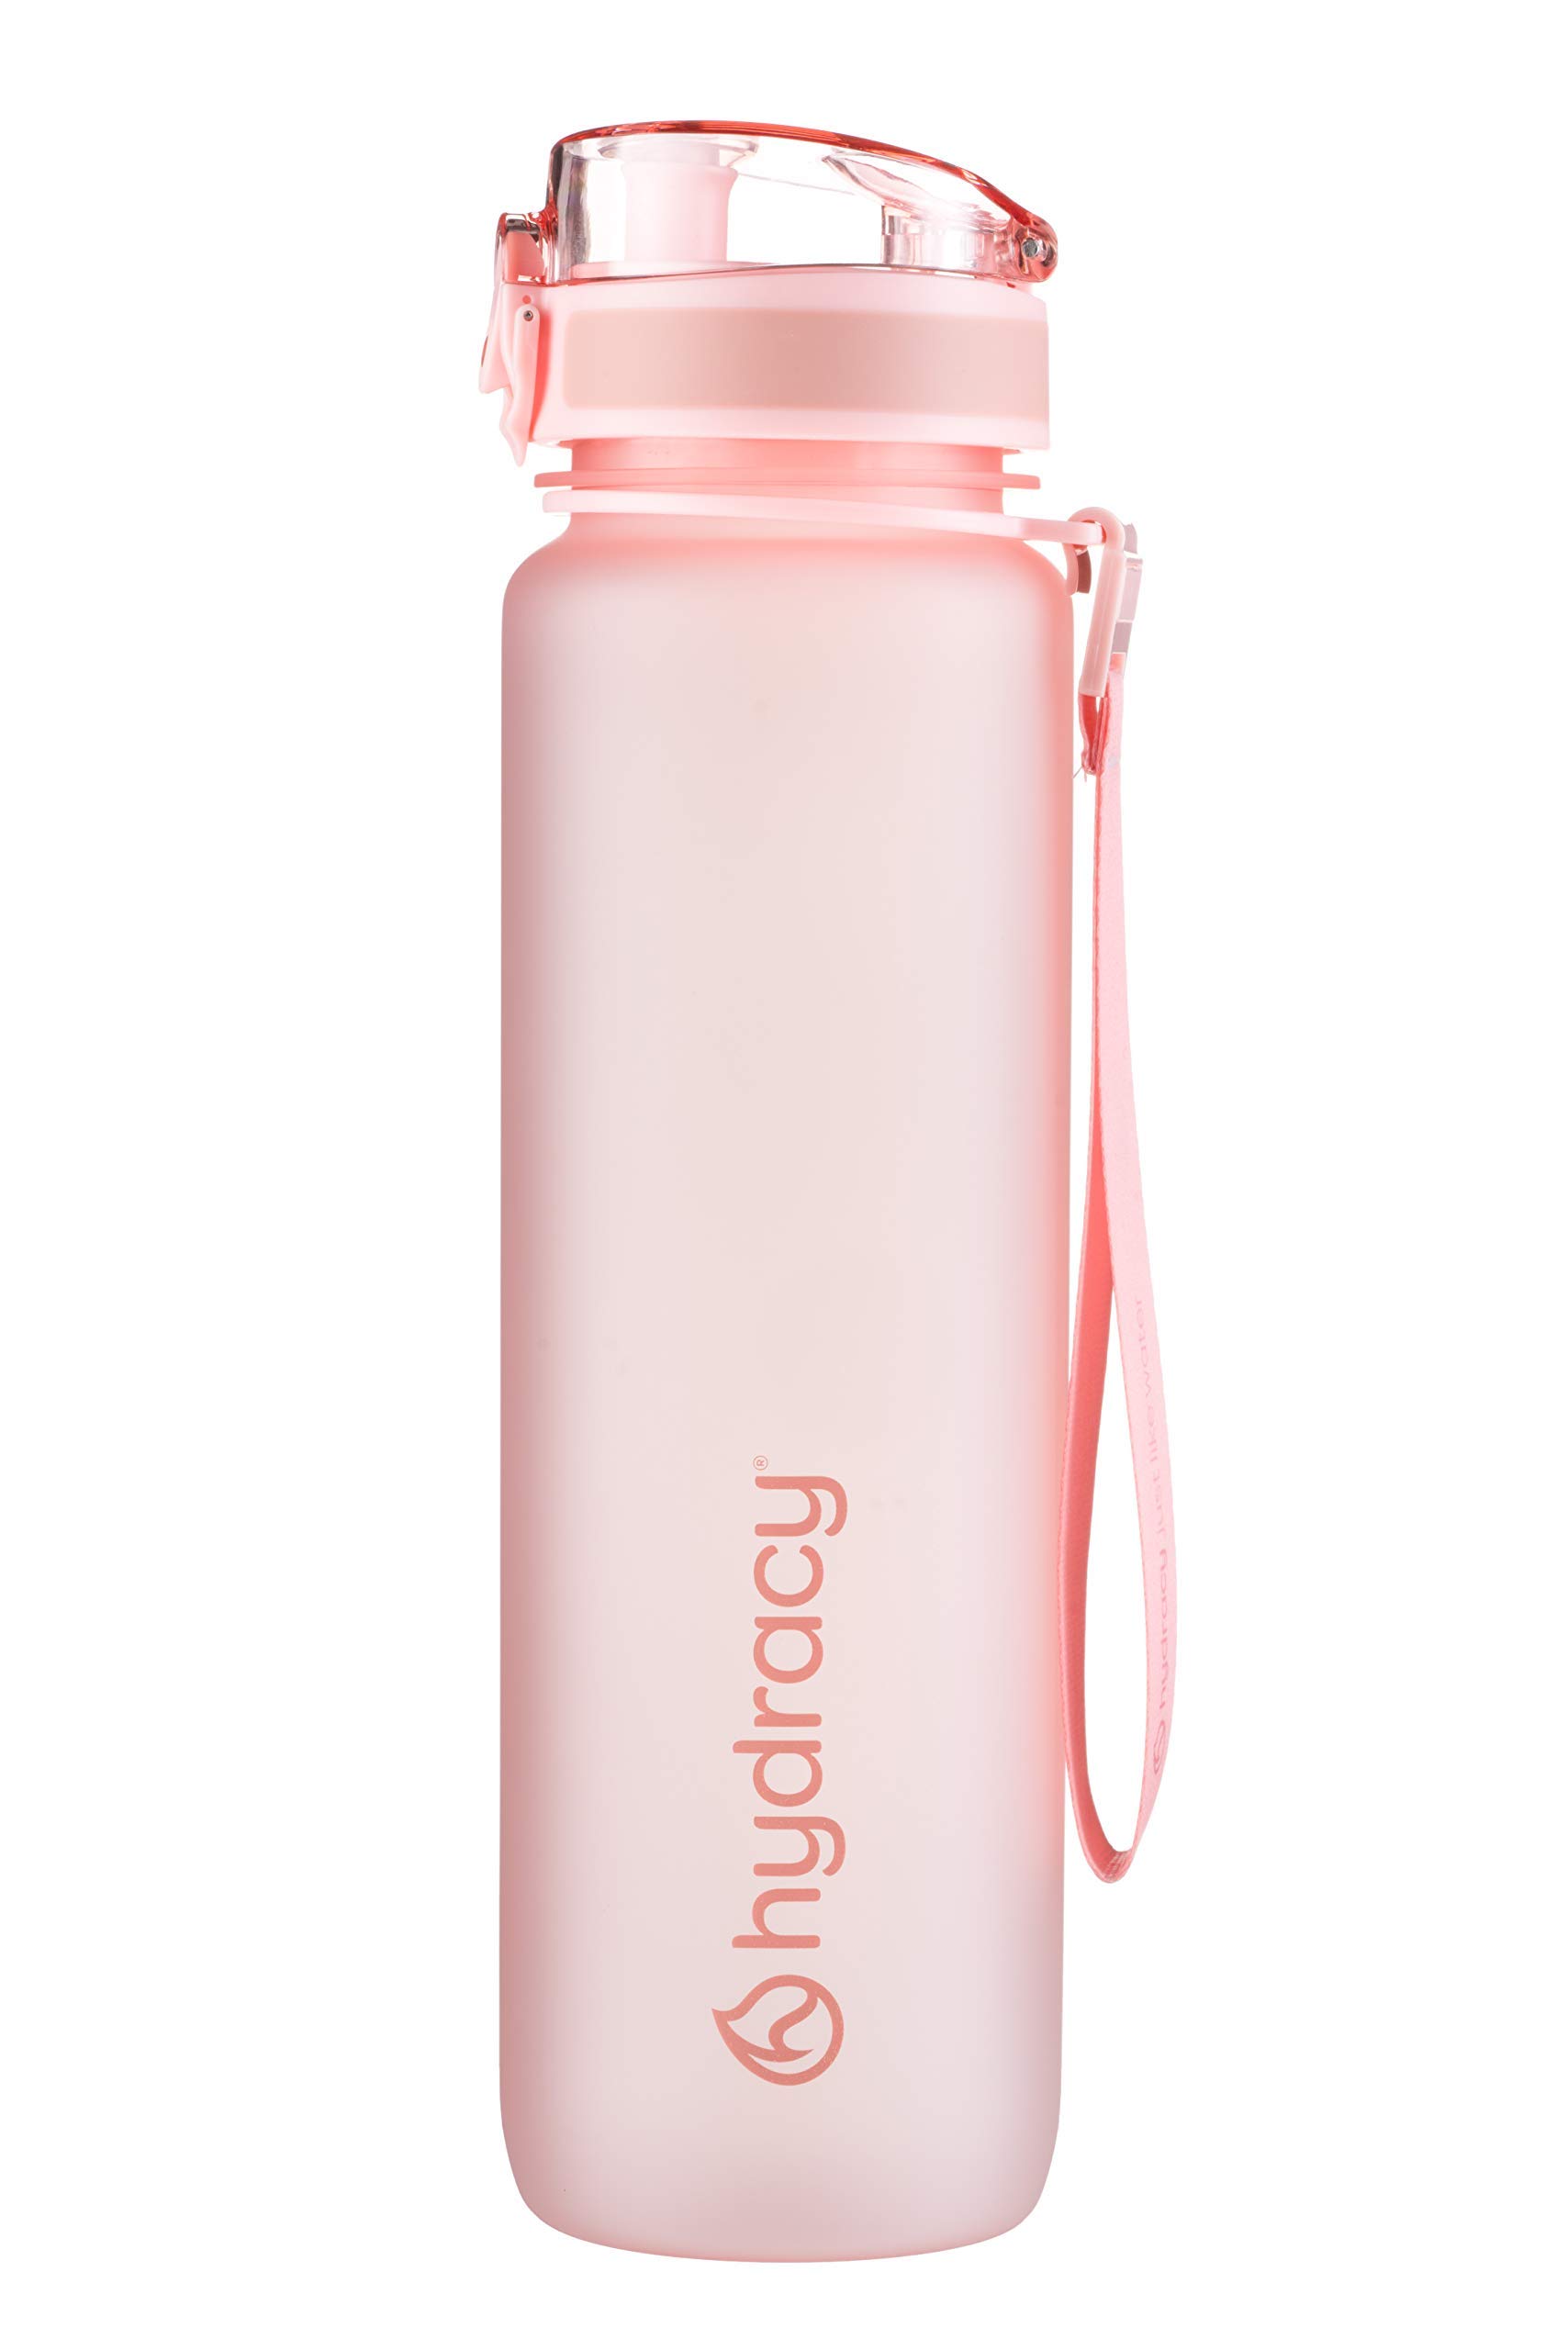 Hydracy Water Bottle with Time Marker - Large 1 Liter 32 Oz - Leak Proof & No  Sweat Gym Bottle with Fruit Infuser Strainer - Ideal Gift for Fitness or  Sports 